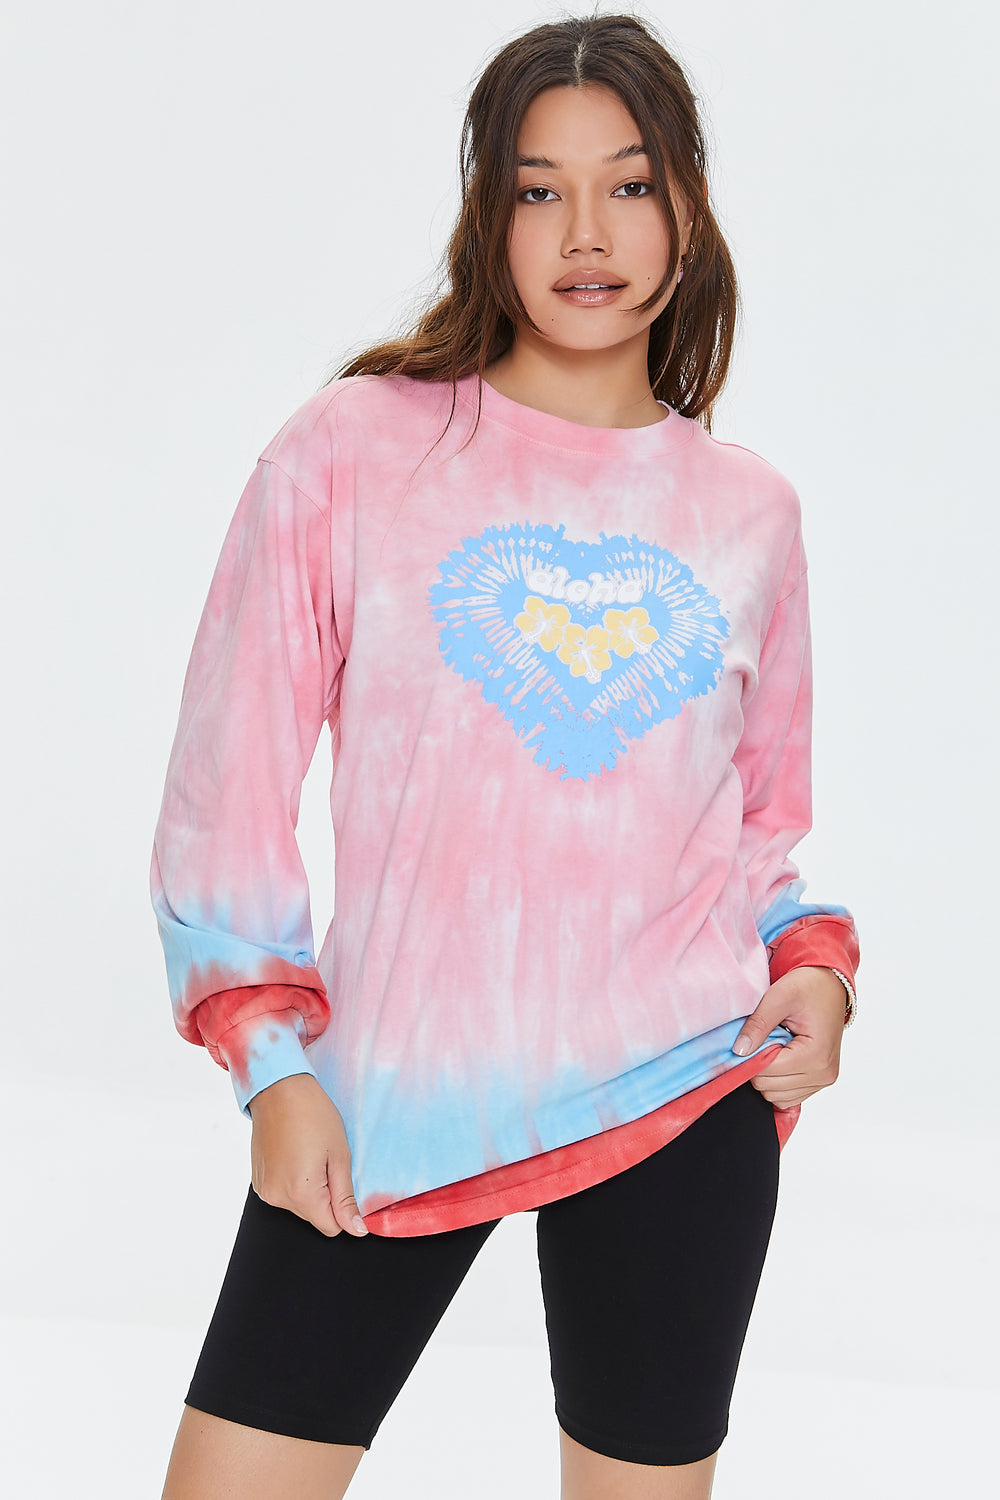 Aloha Graphic Ombre Tie-Dye Tee Pink